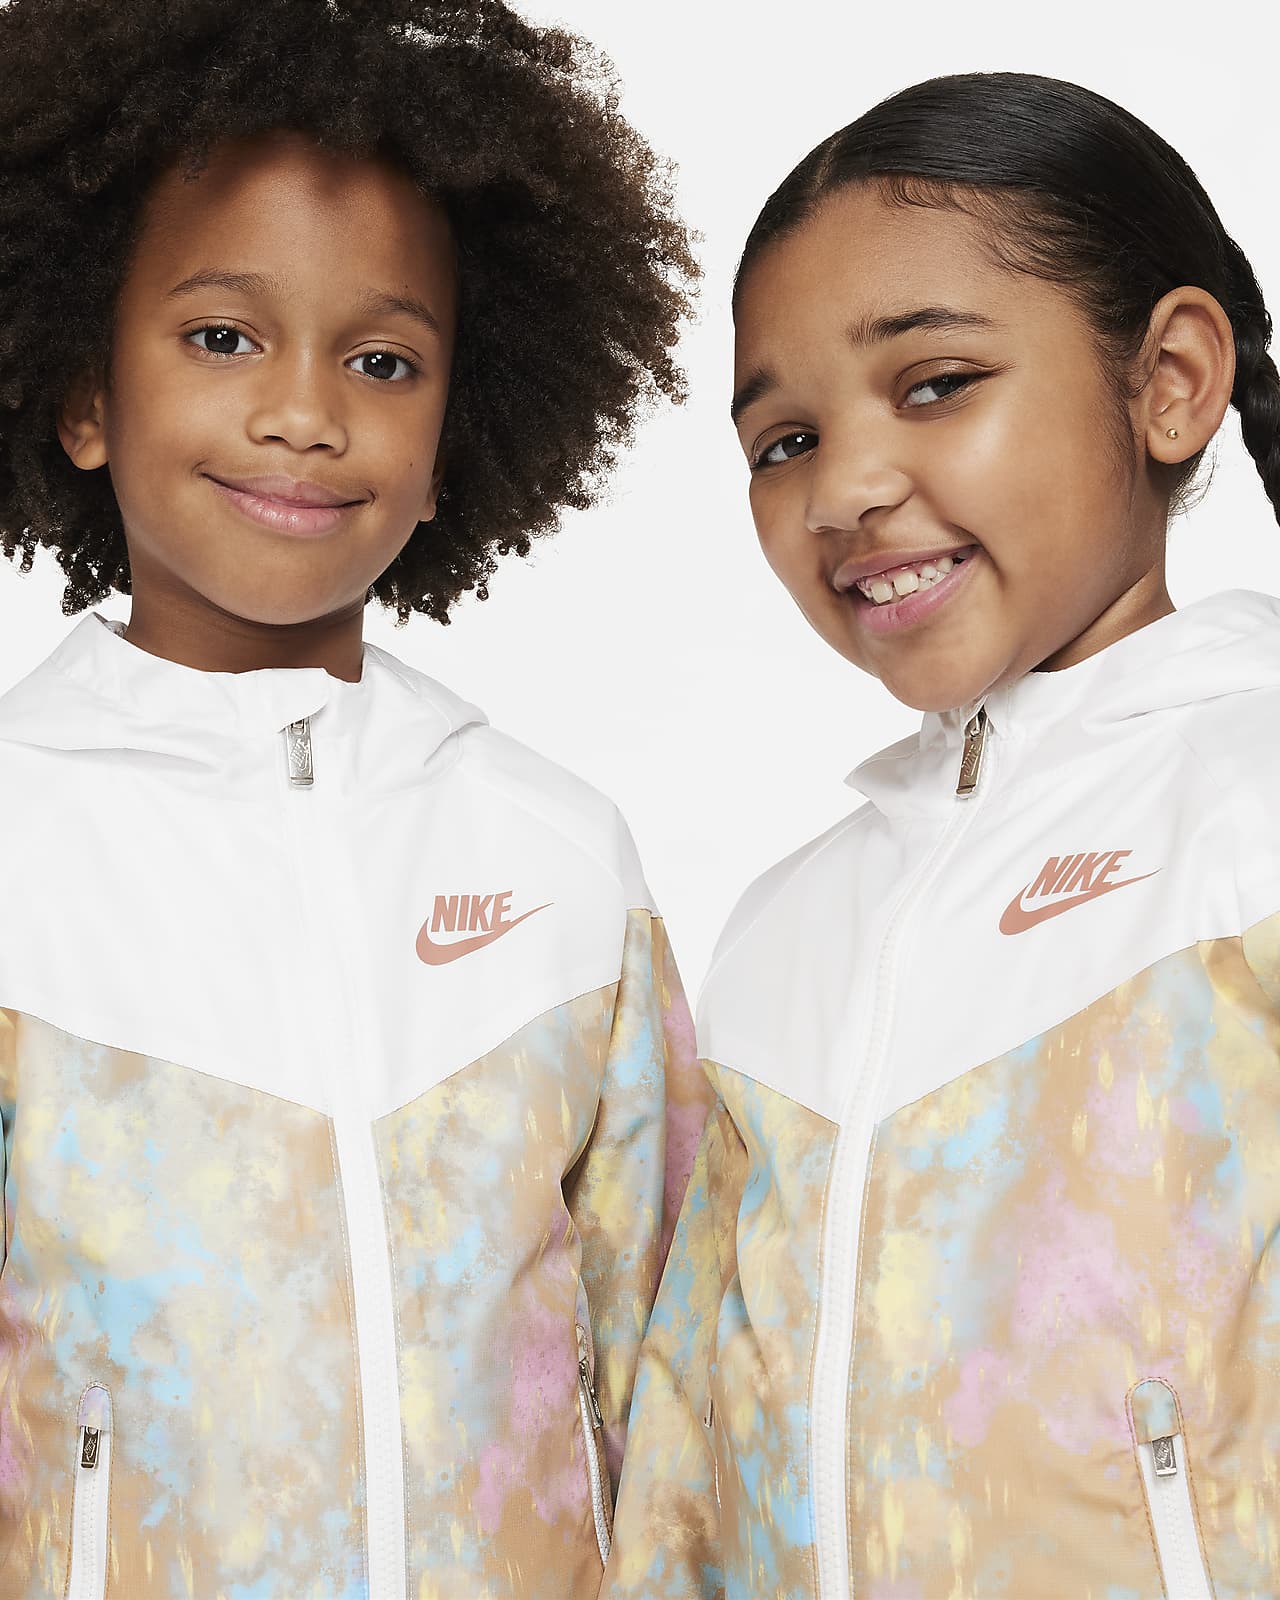 https://static.nike.com/a/images/t_PDP_1280_v1/f_auto,q_auto:eco/0a7cd9f9-a151-4e7a-bf90-d1bb68c9a818/little-kids-printed-jacket-qnNZD6.png